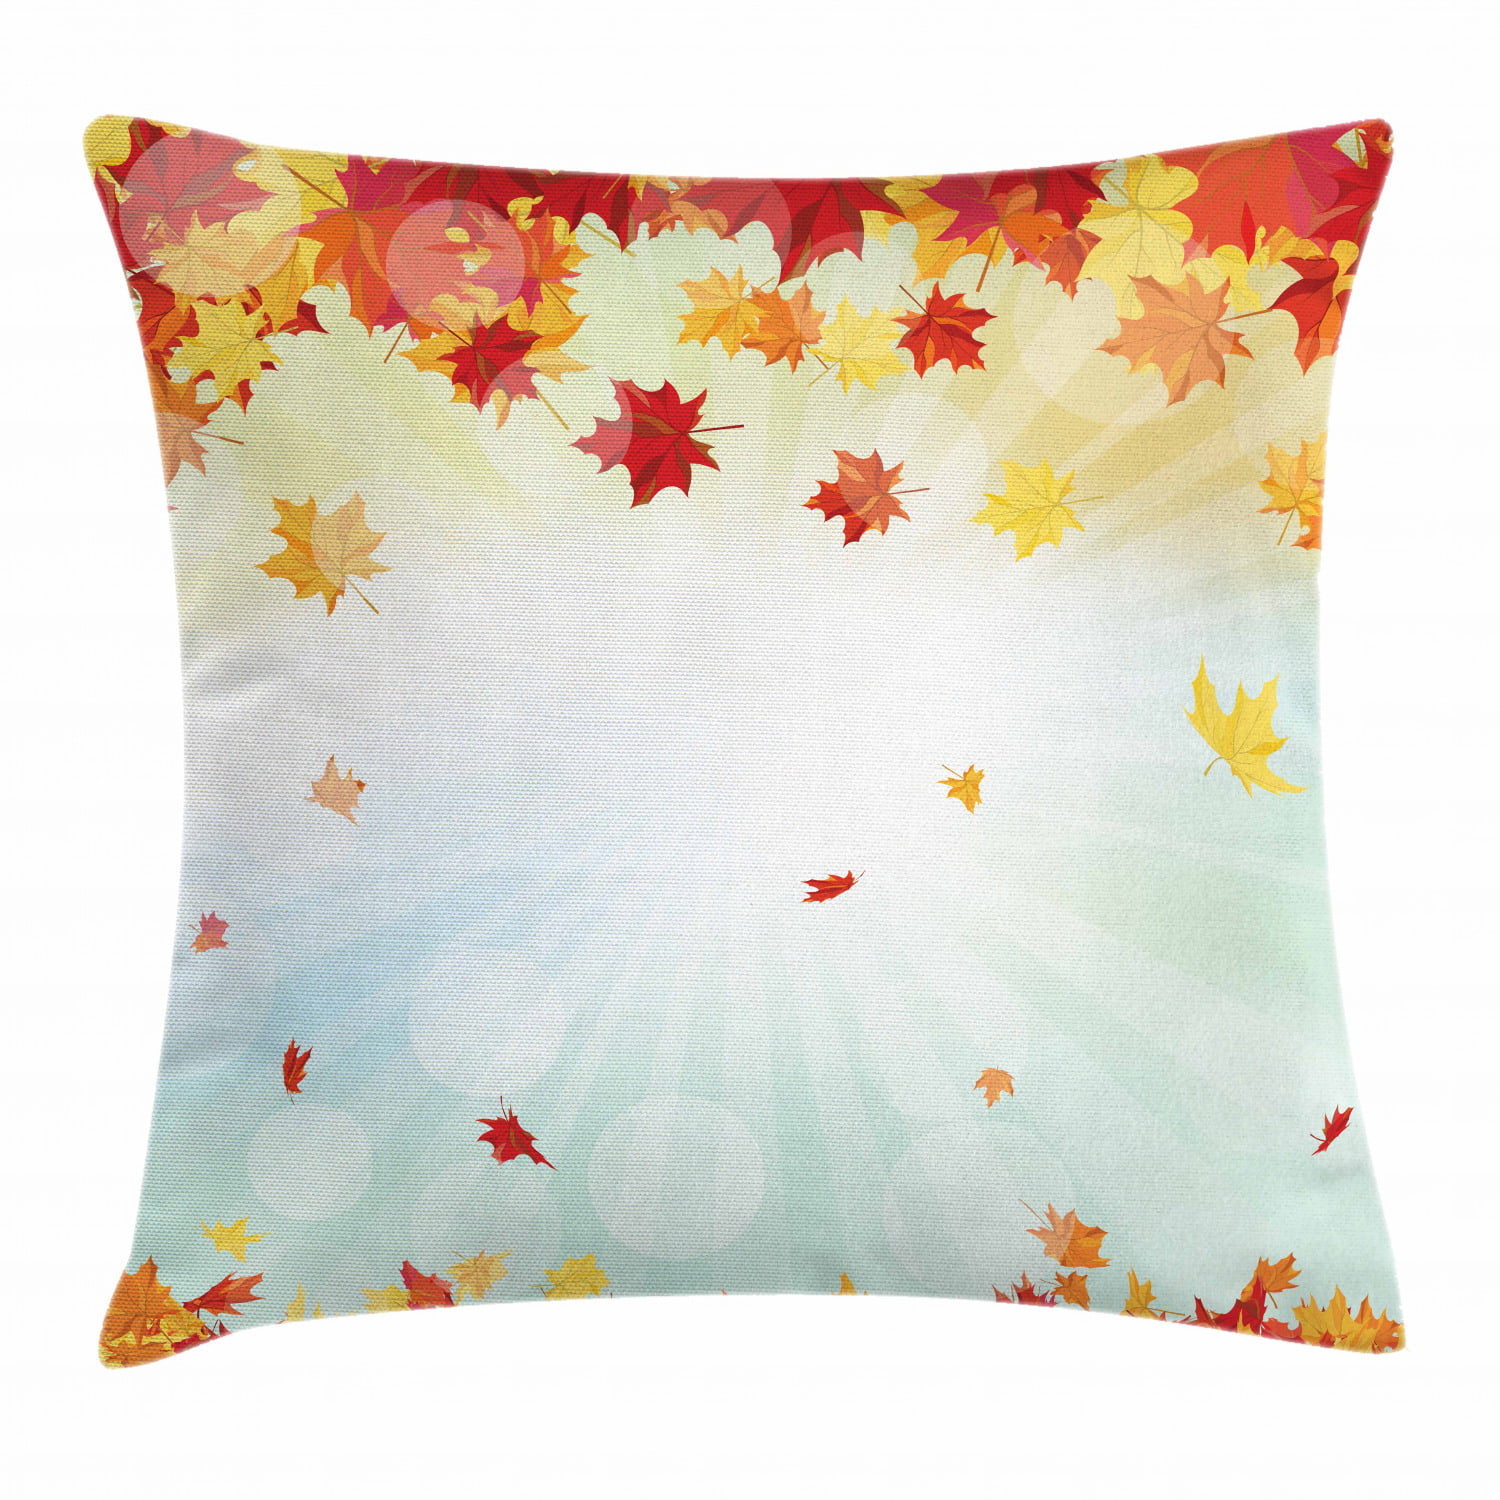 Leaf  Autumn Pillow Case Maple Harvest Cushion Cover Yellow Silhouette 